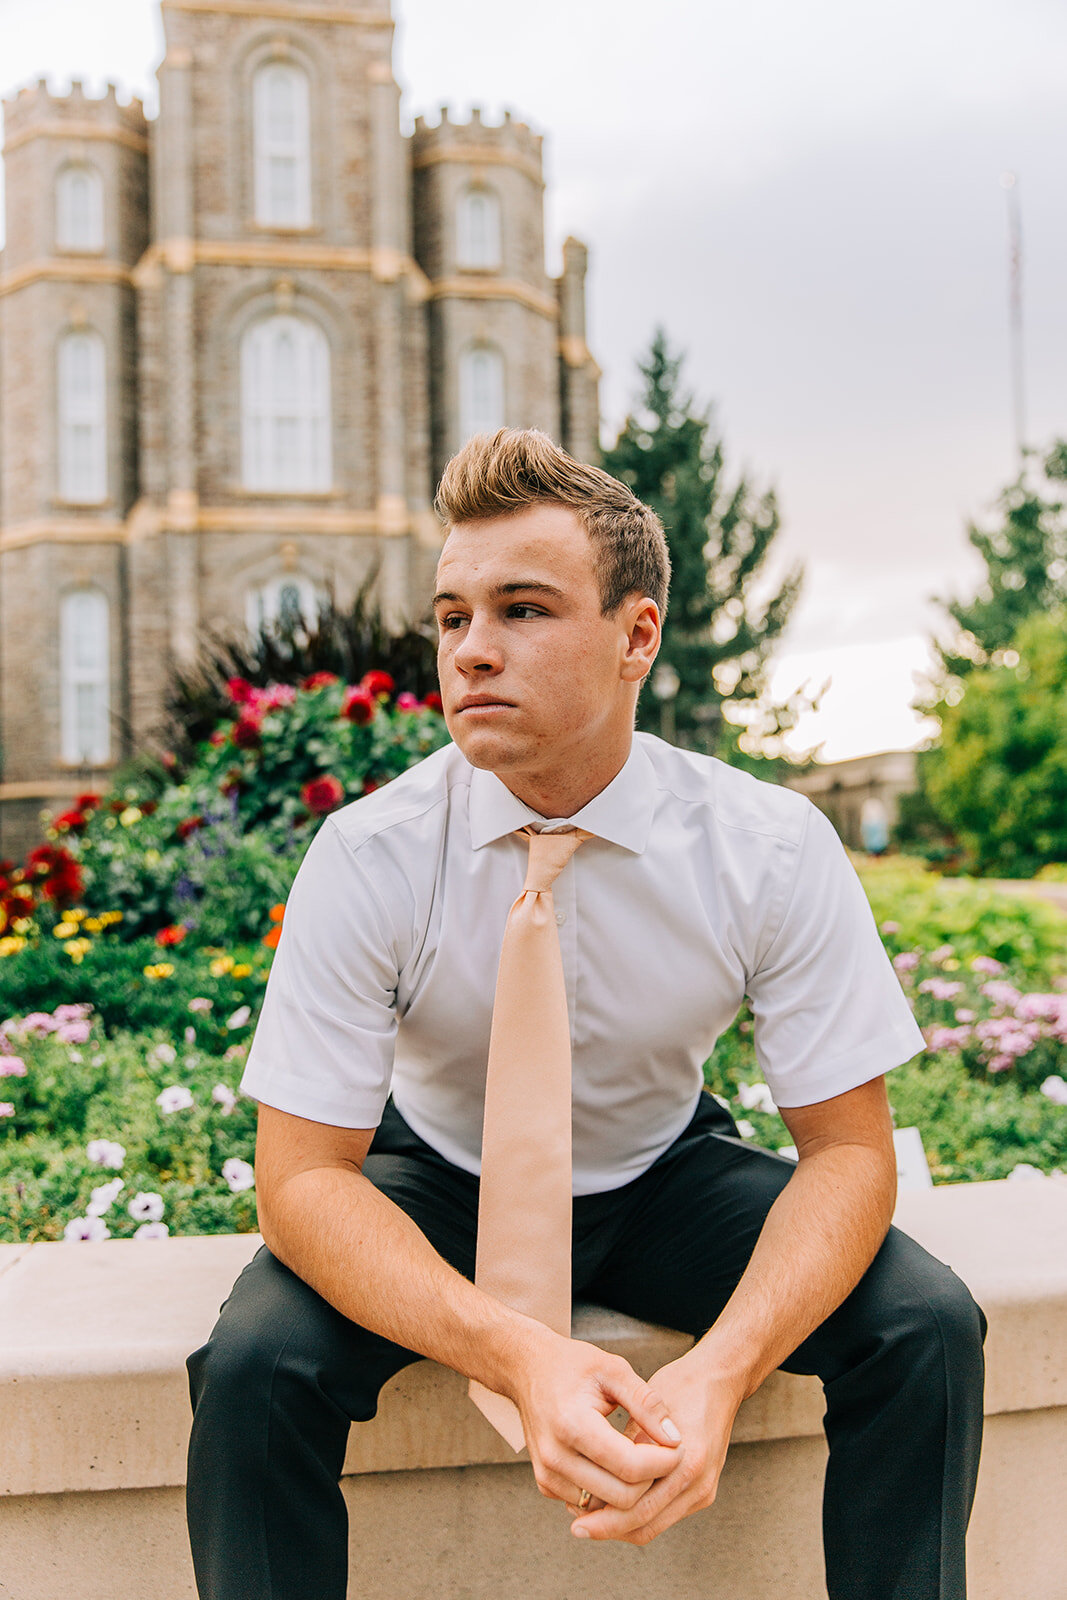  professional missionary portraits classy senior photos headshots I hope they call me on a mission logan utah temple photo shoot missionary in white shirt and tie peach tie young man portraits pose idea #bellaalderphoto #missionary #missionaryportrai